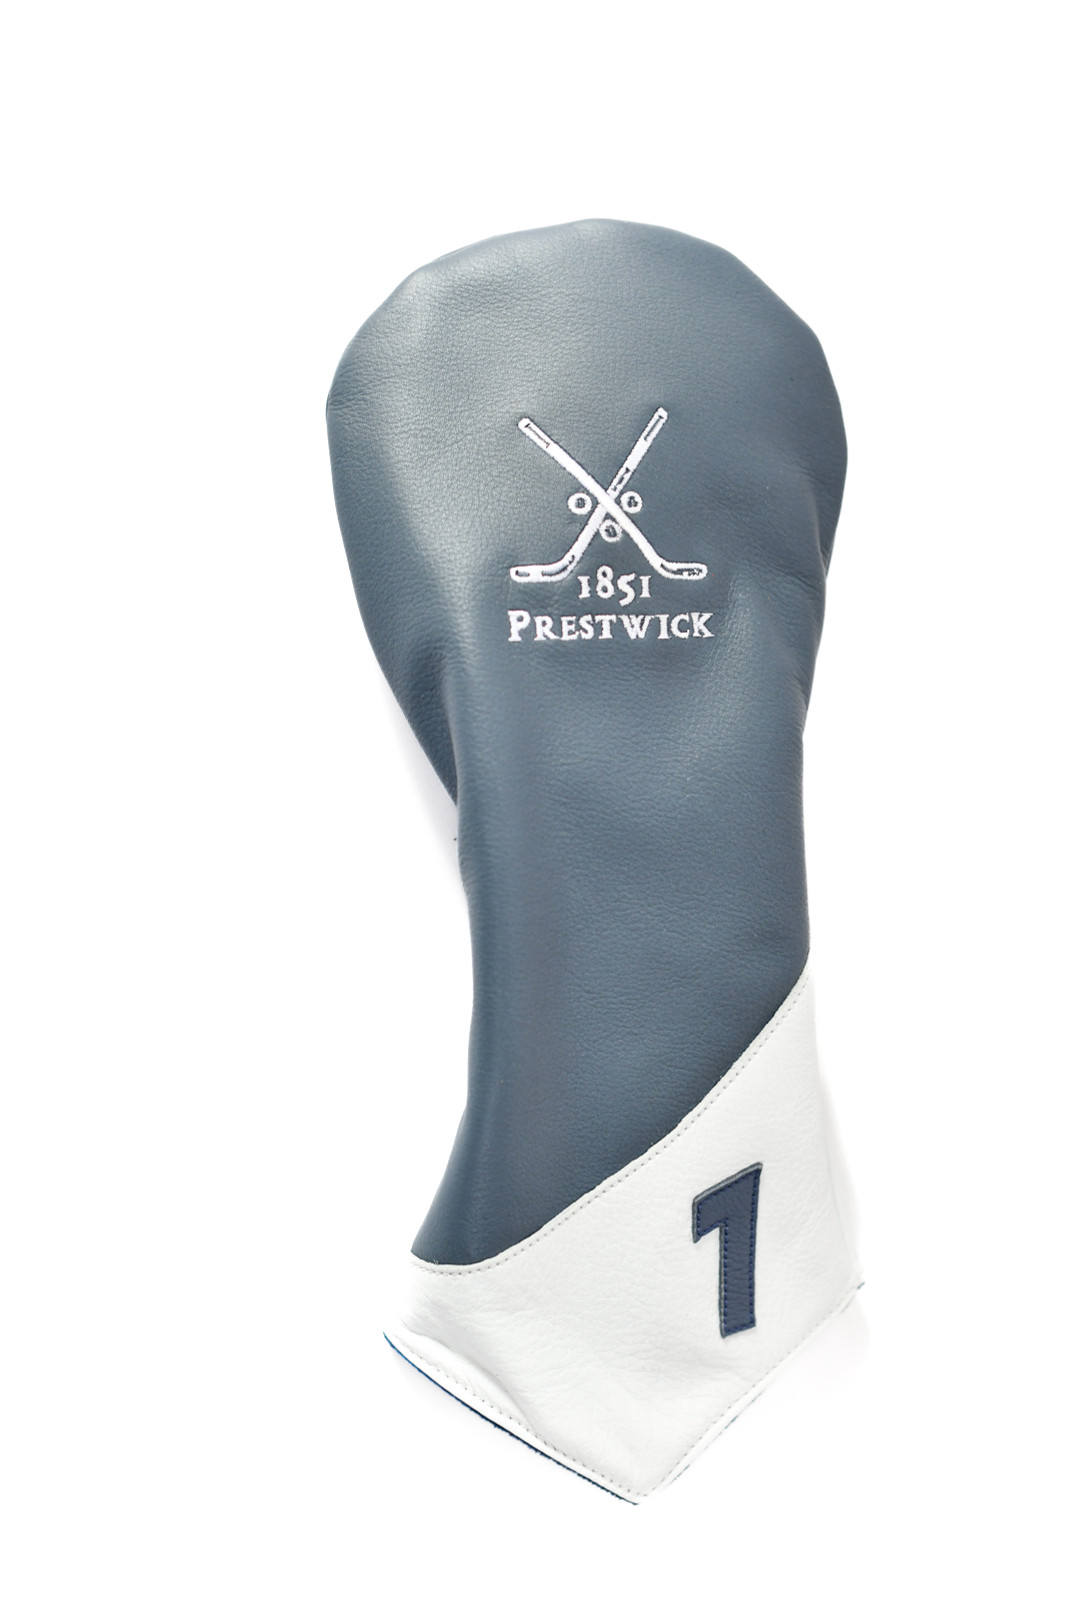 Prestwick Leather Headcover - Steel Blue/White